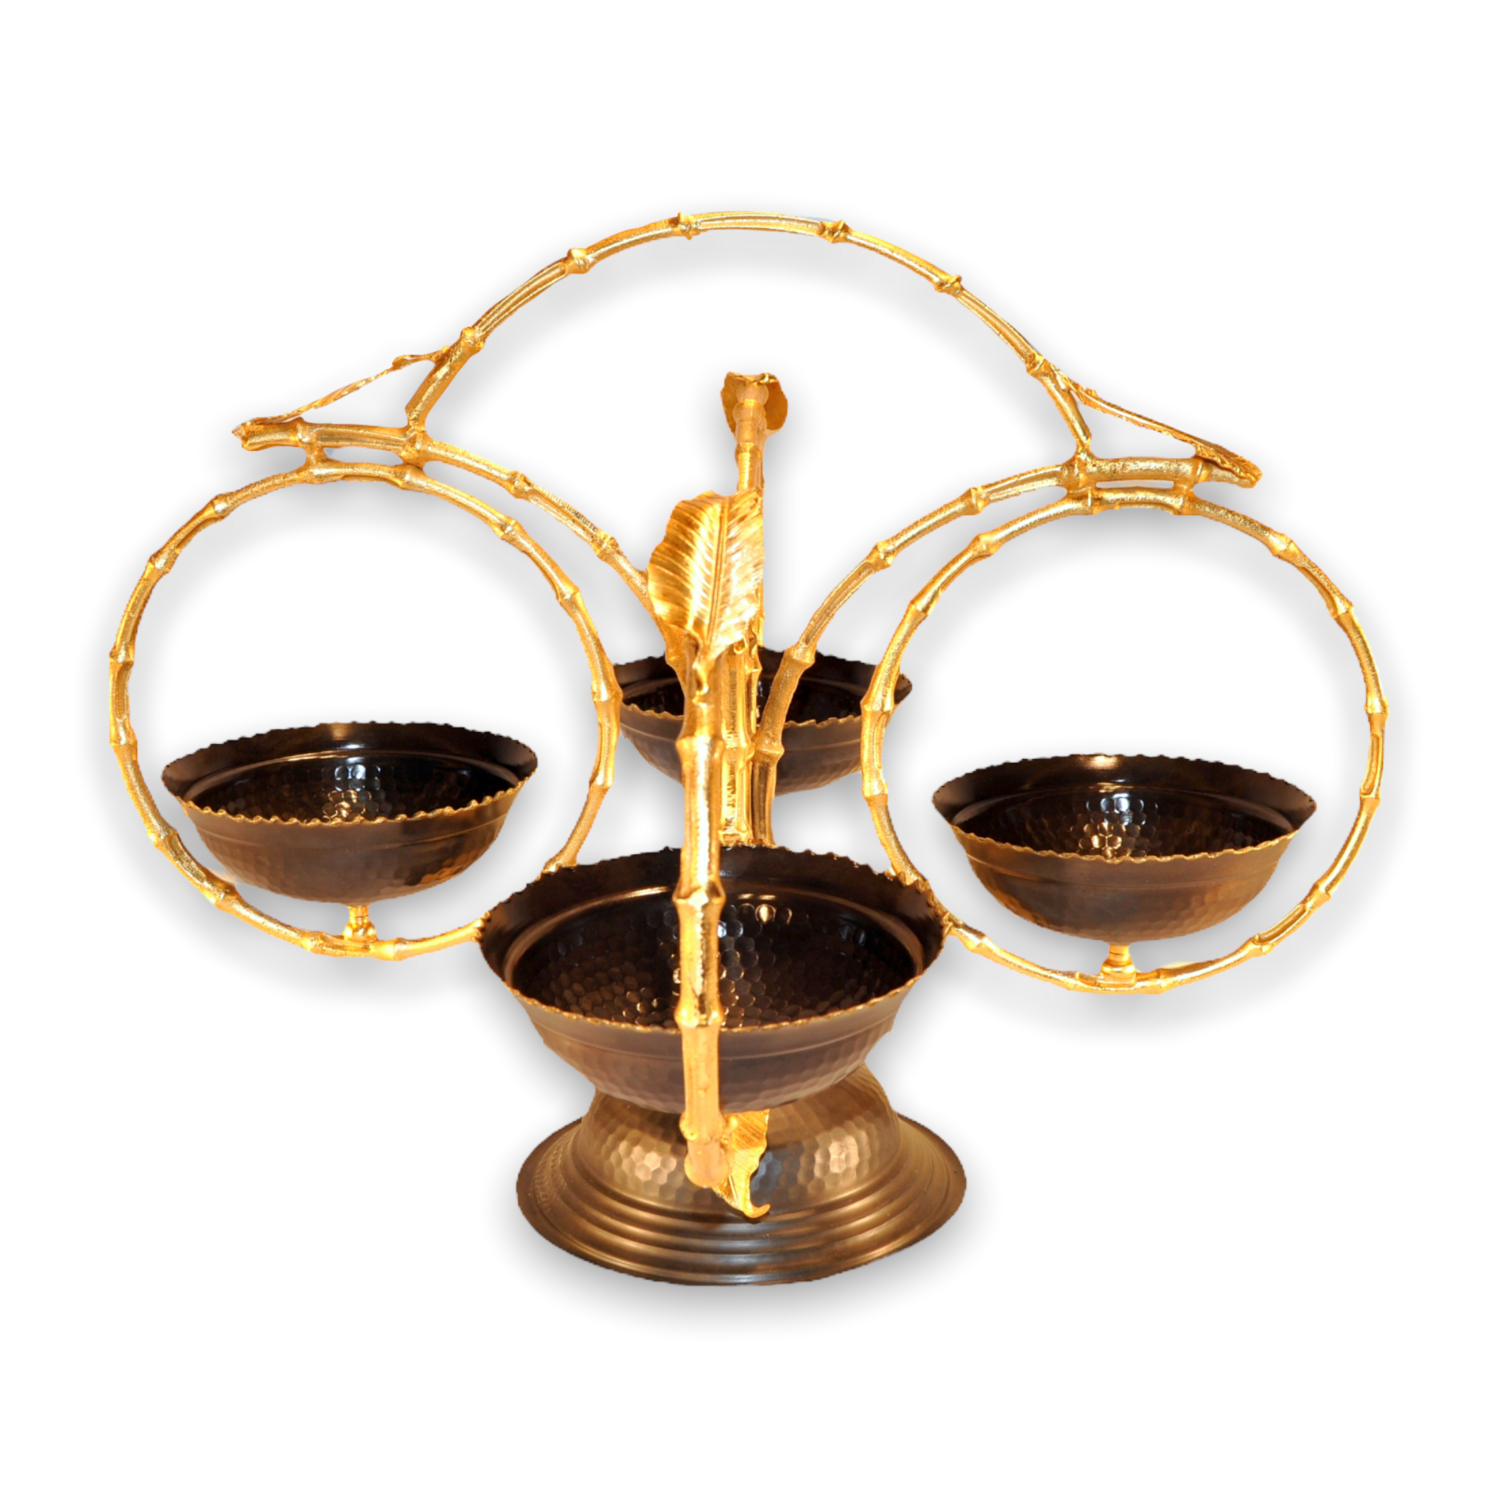 Four Chocolate Copper Bowls Set- Gold Branch Holder